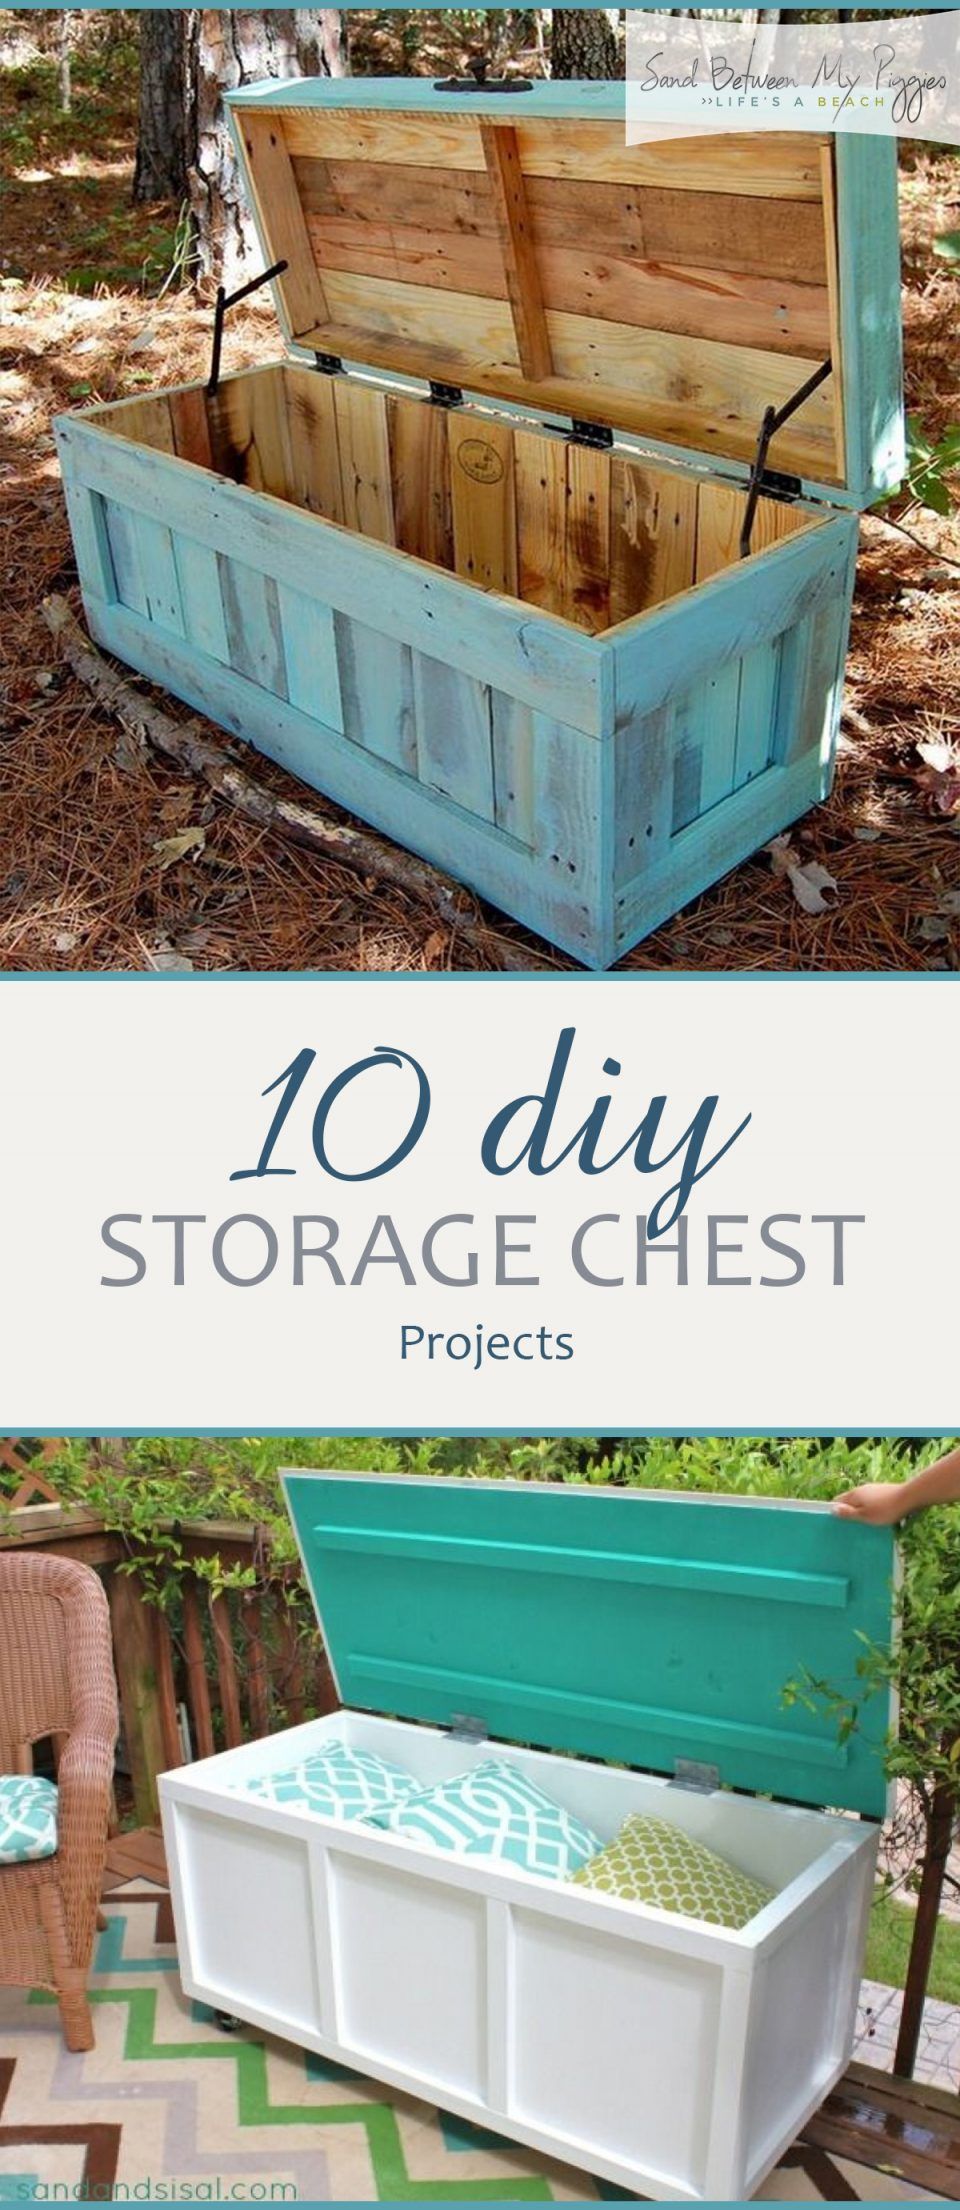 10 DIY Storage Chest Projects | Sand Between My Piggies- Beach Vacations and Travel - all things Beach - 10 DIY Storage Chest Projects | Sand Between My Piggies- Beach Vacations and Travel - all things Beach -   19 diy Storage bench ideas